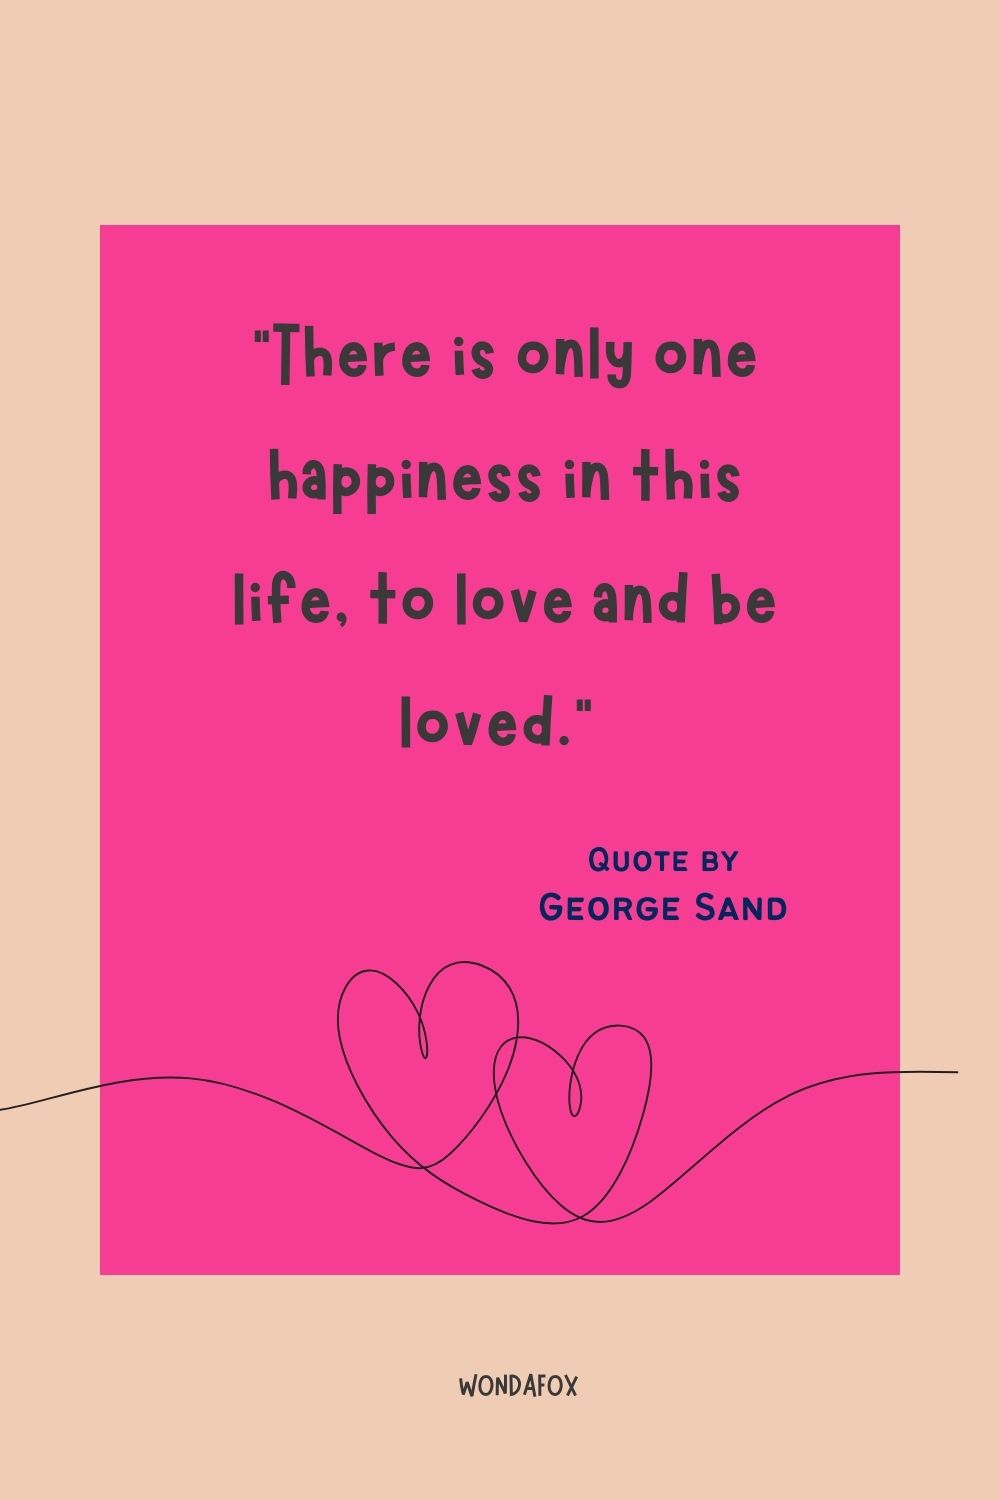 “There is only one happiness in this life, to love and be loved.”
 George Sand